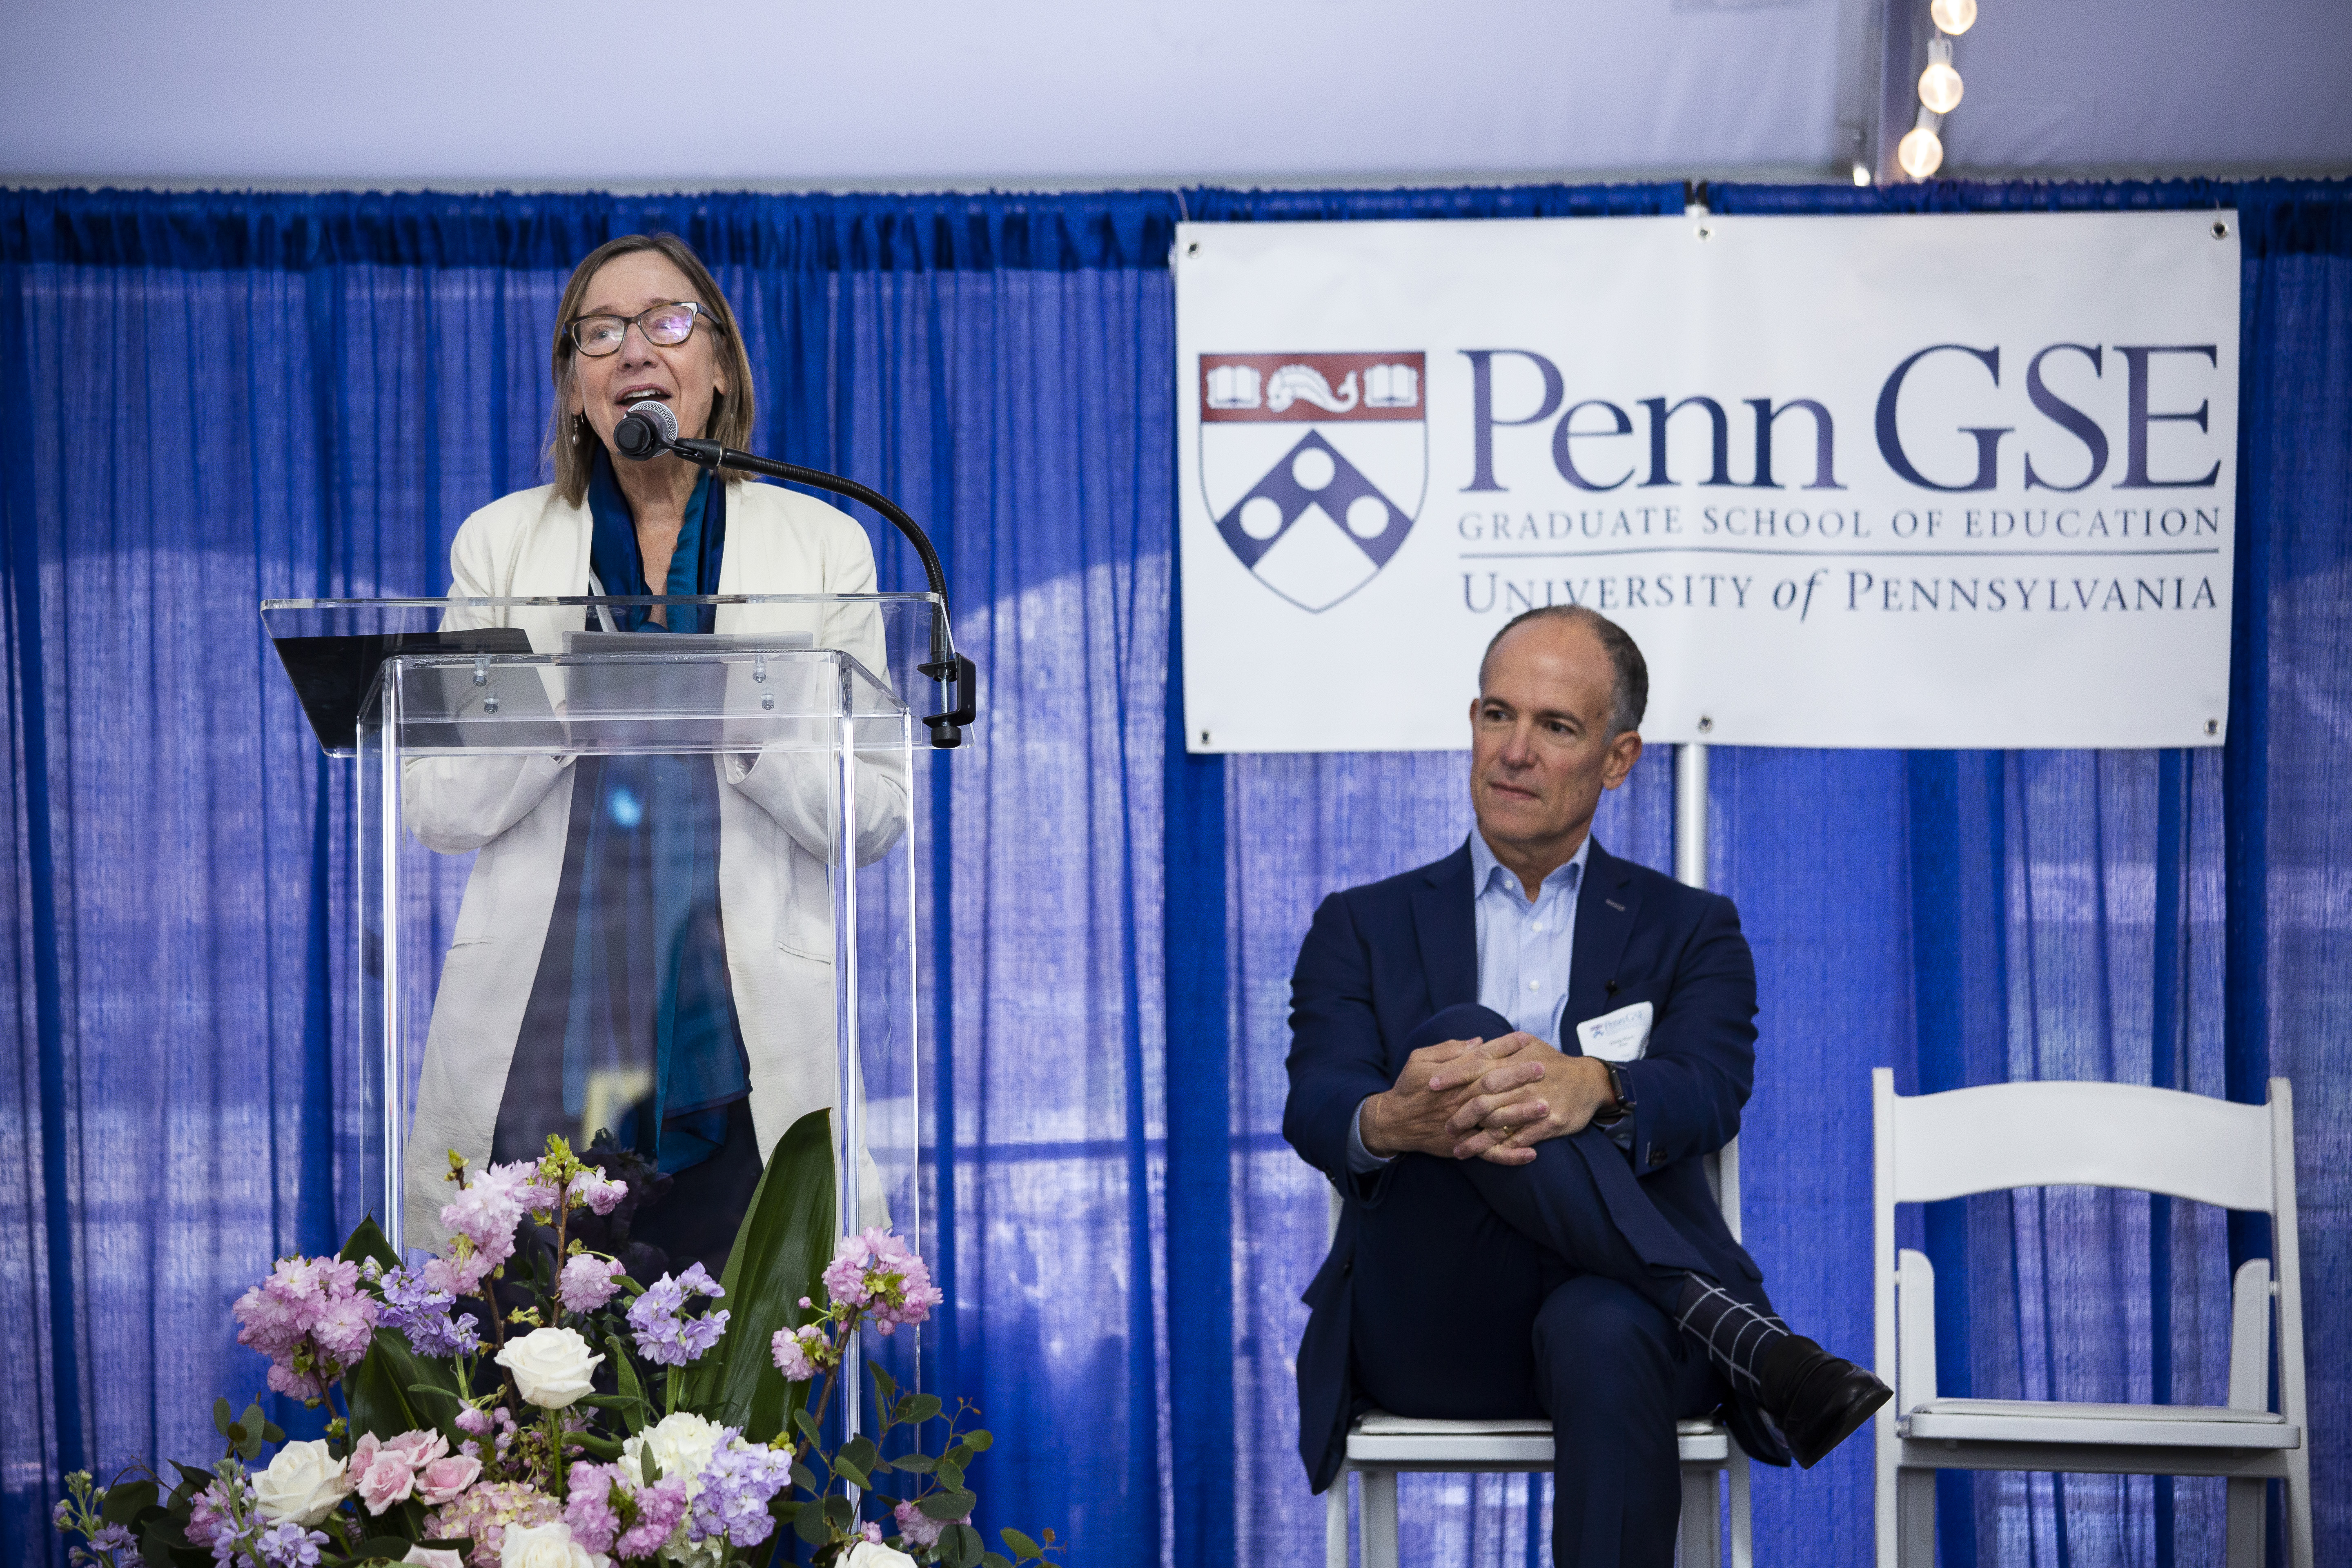 Dean Grossman speaking at podium with Doug Korn sitting to her right